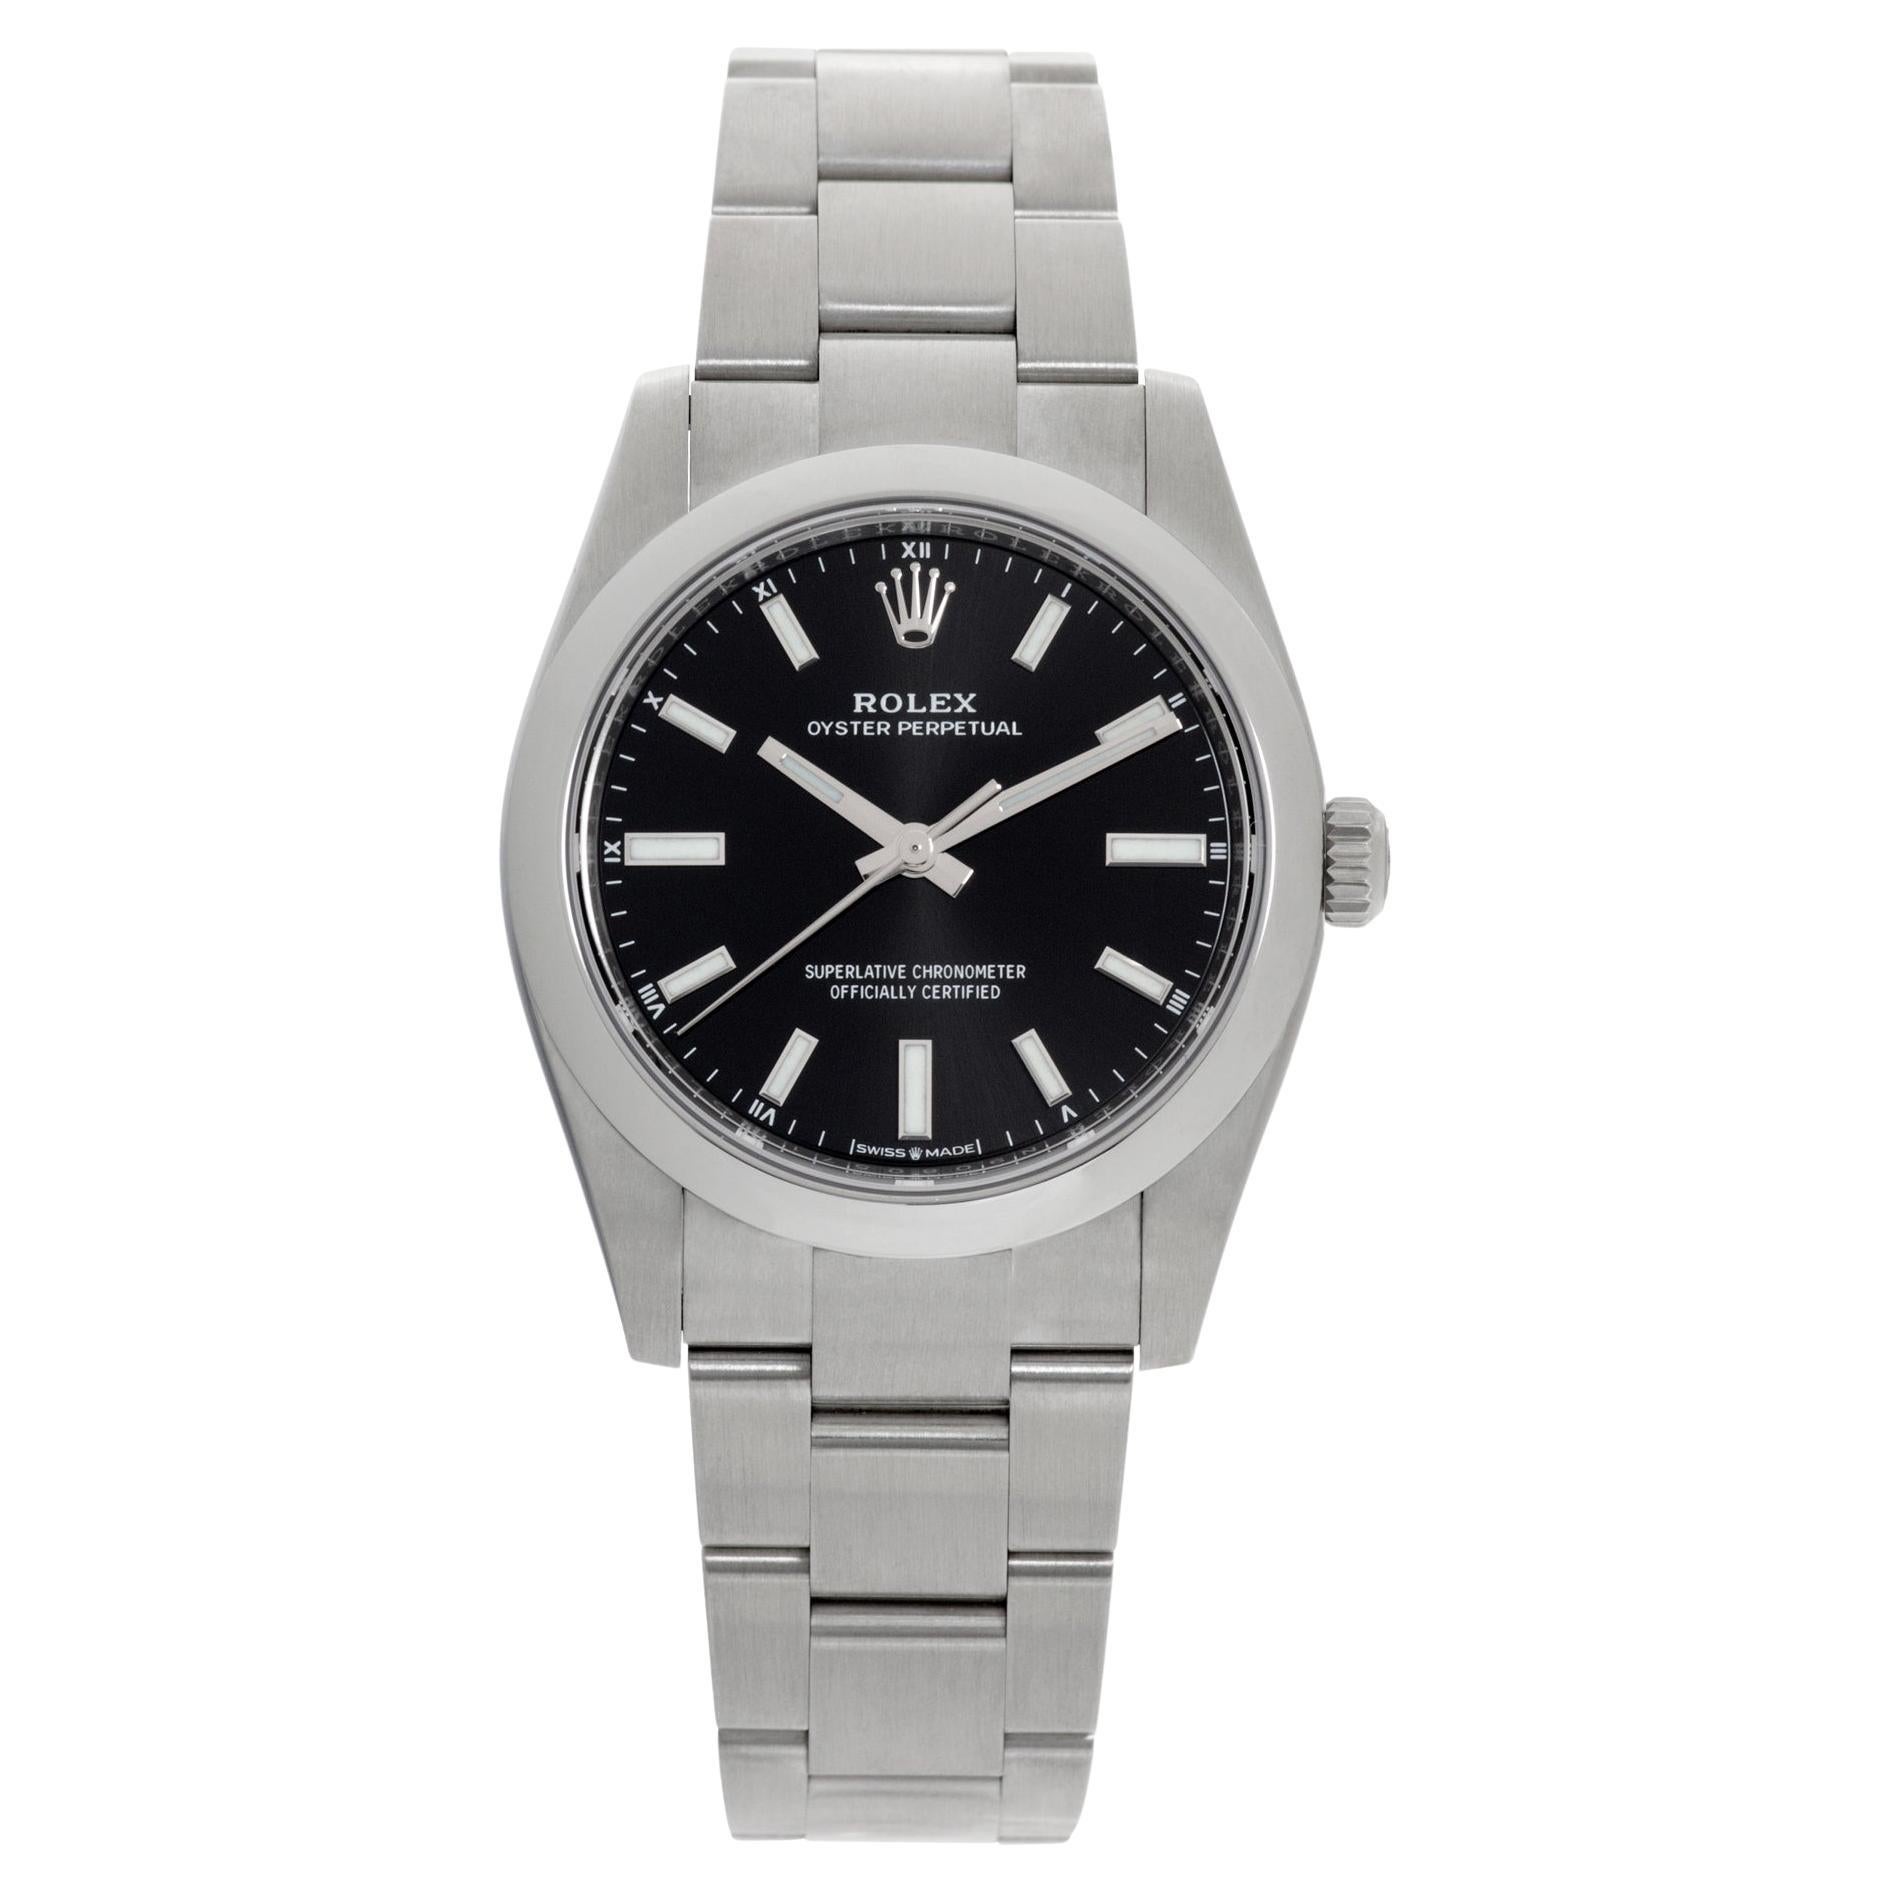 Rolex Oyster Perpetual 124200 Oyster Perpetual Montre non utilisée